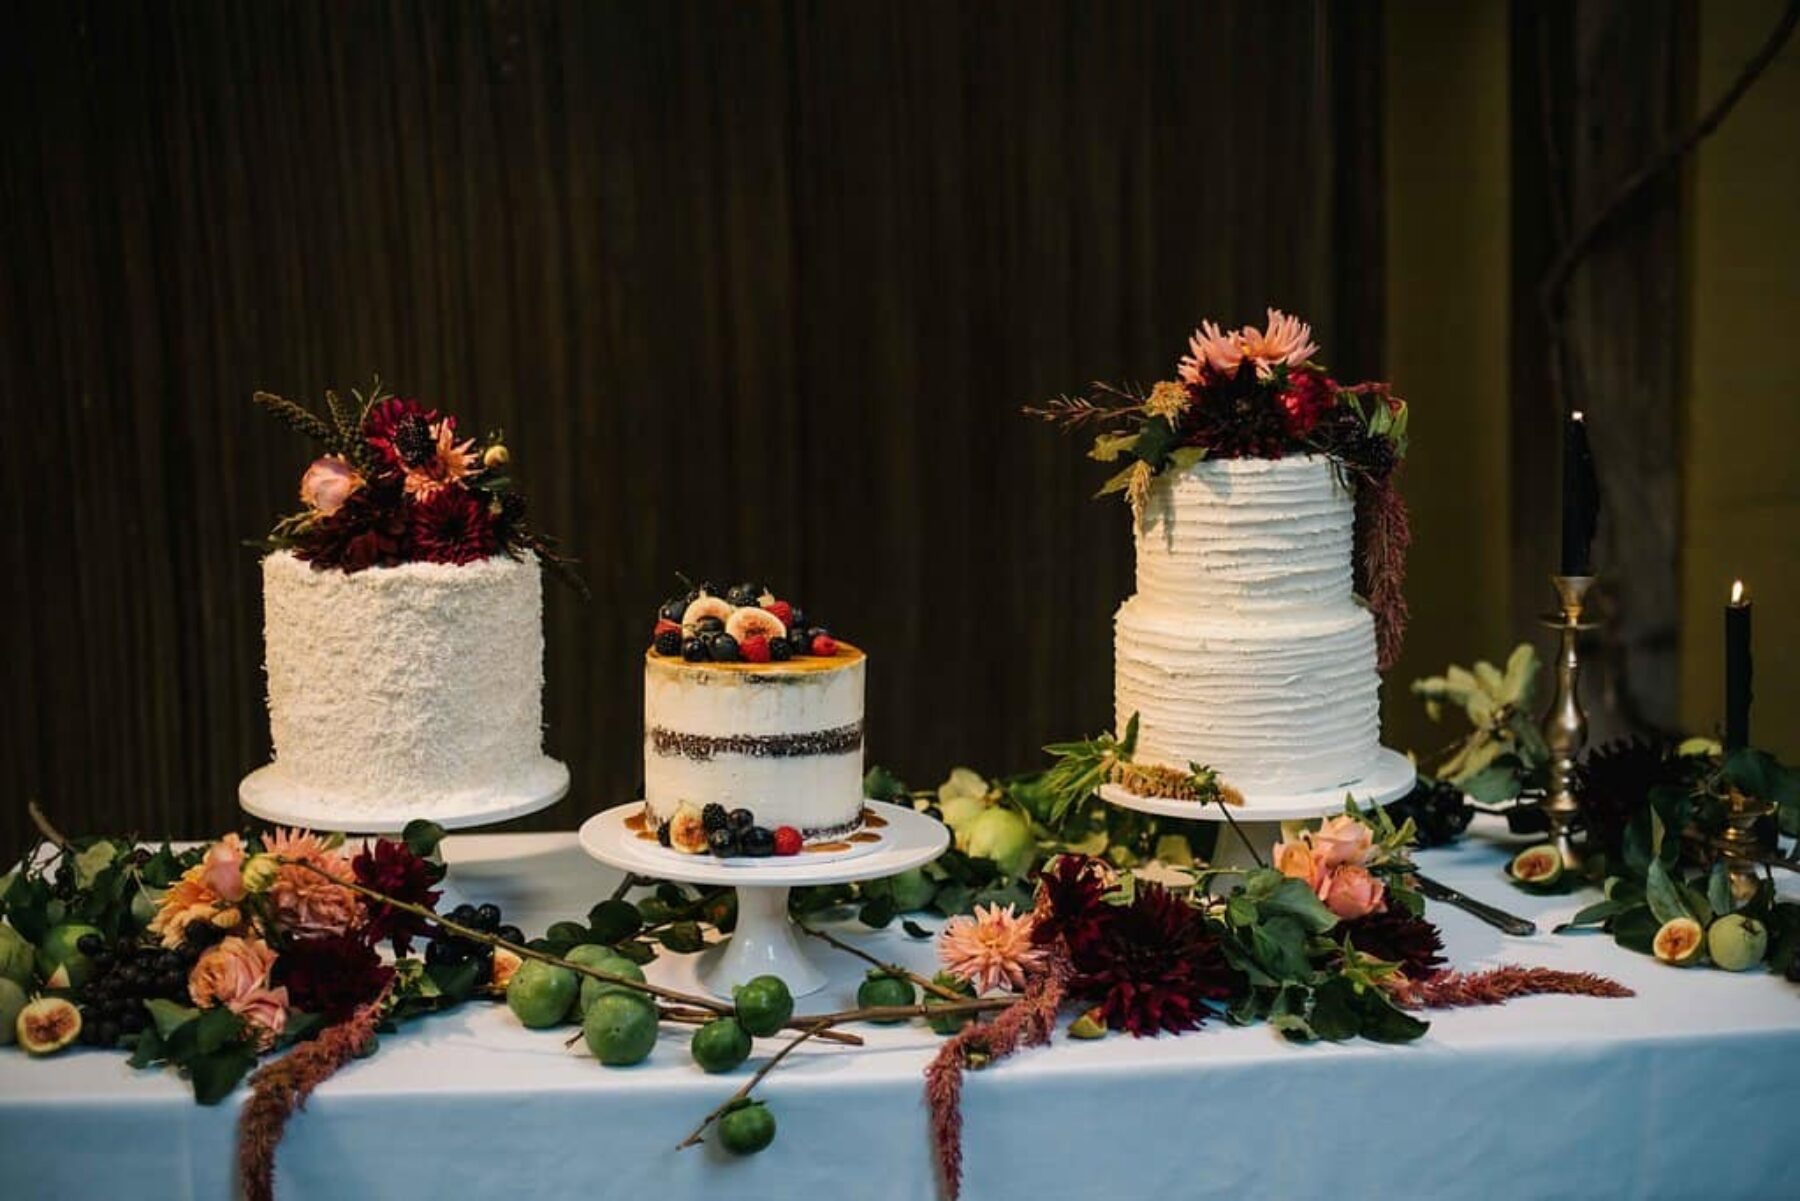 trio of wedding cakes with fresh fruit and flower toppers